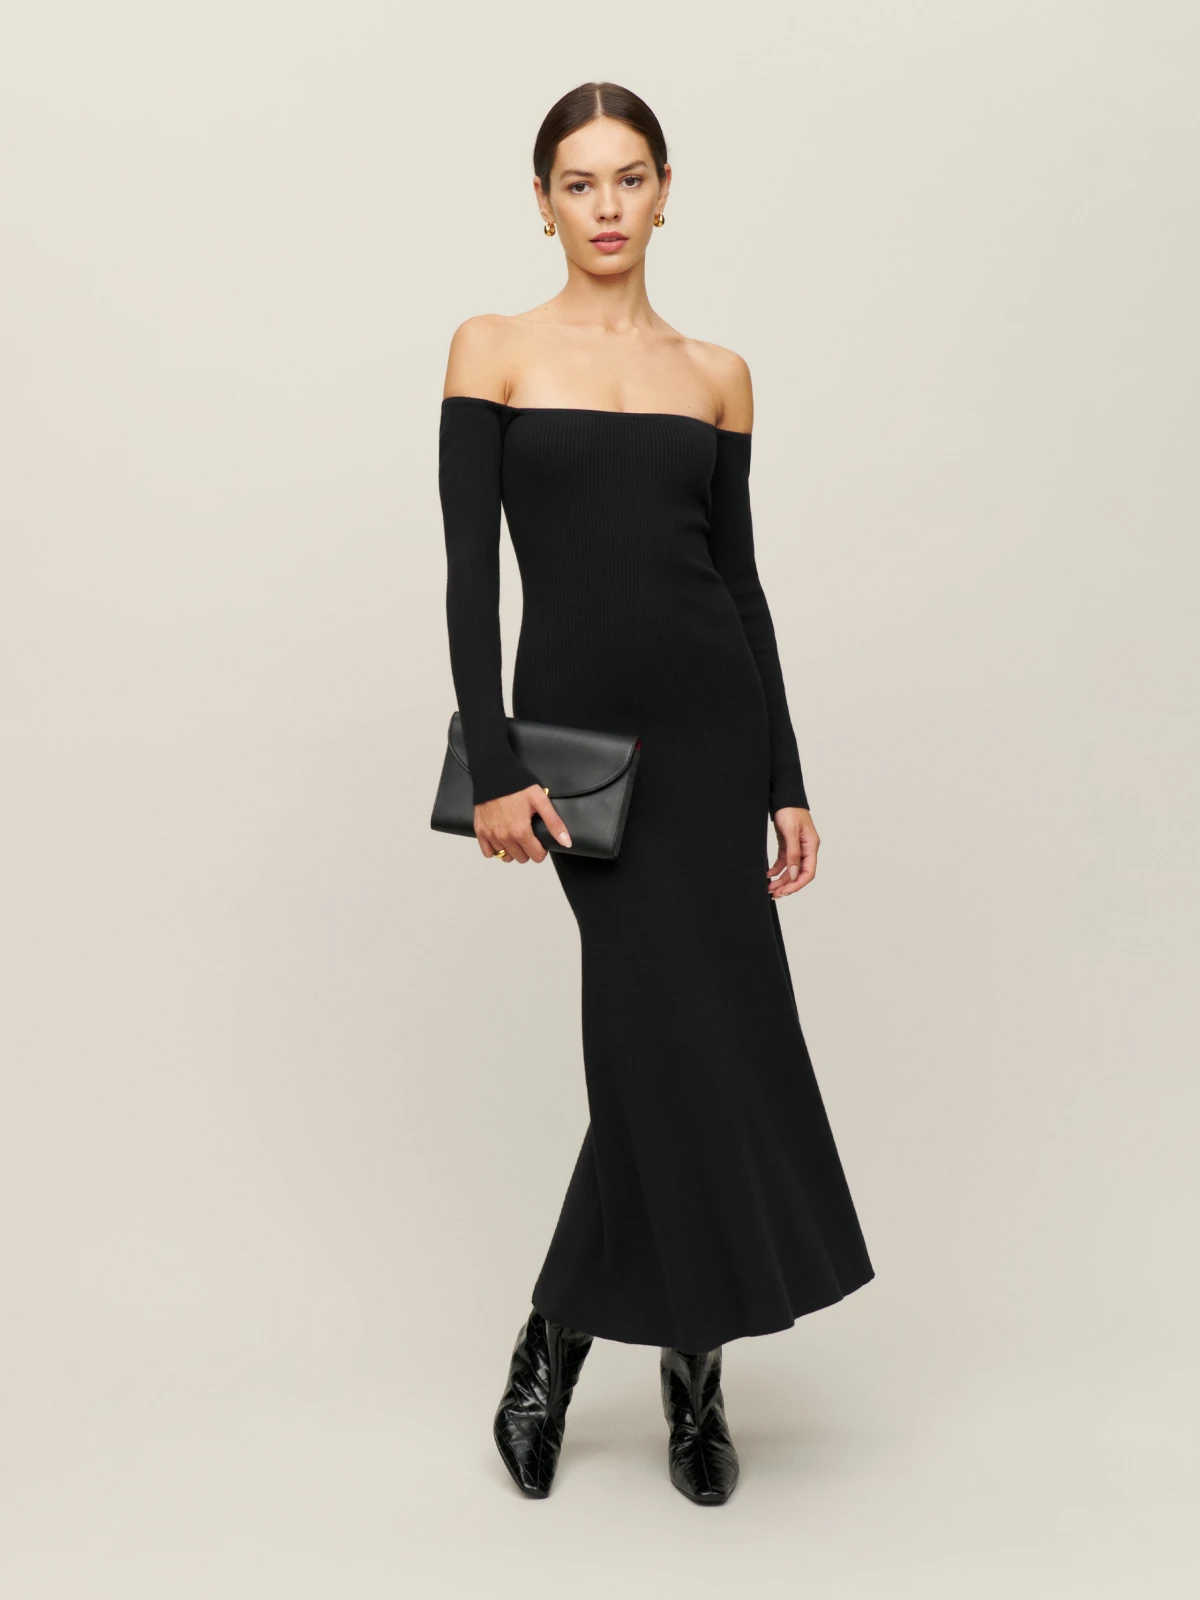 Off the shoulder sweater dress ankle-length